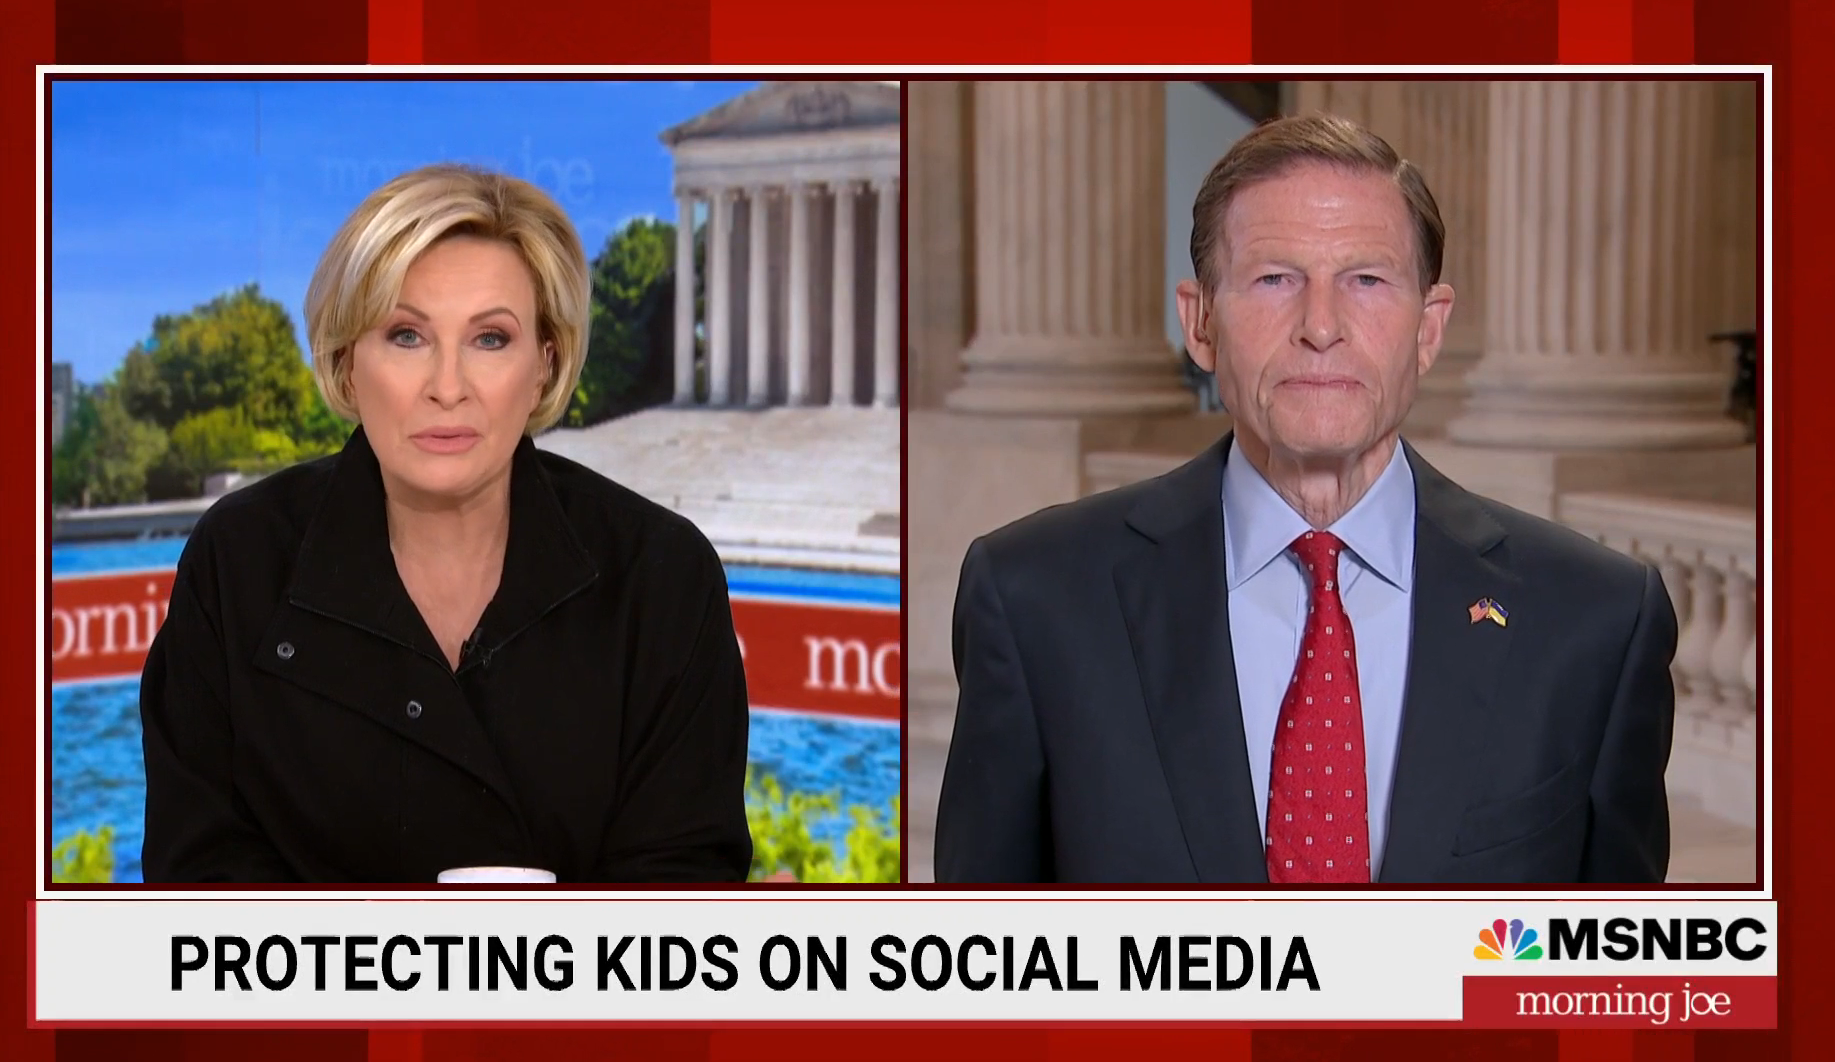 Blumenthal and Blackburn appeared on CNN, CBS This Morning, CNBC, Fox News, and GMA3 on ABC to discuss the bipartisan legislation. Blumenthal also appeared on MSNBC.